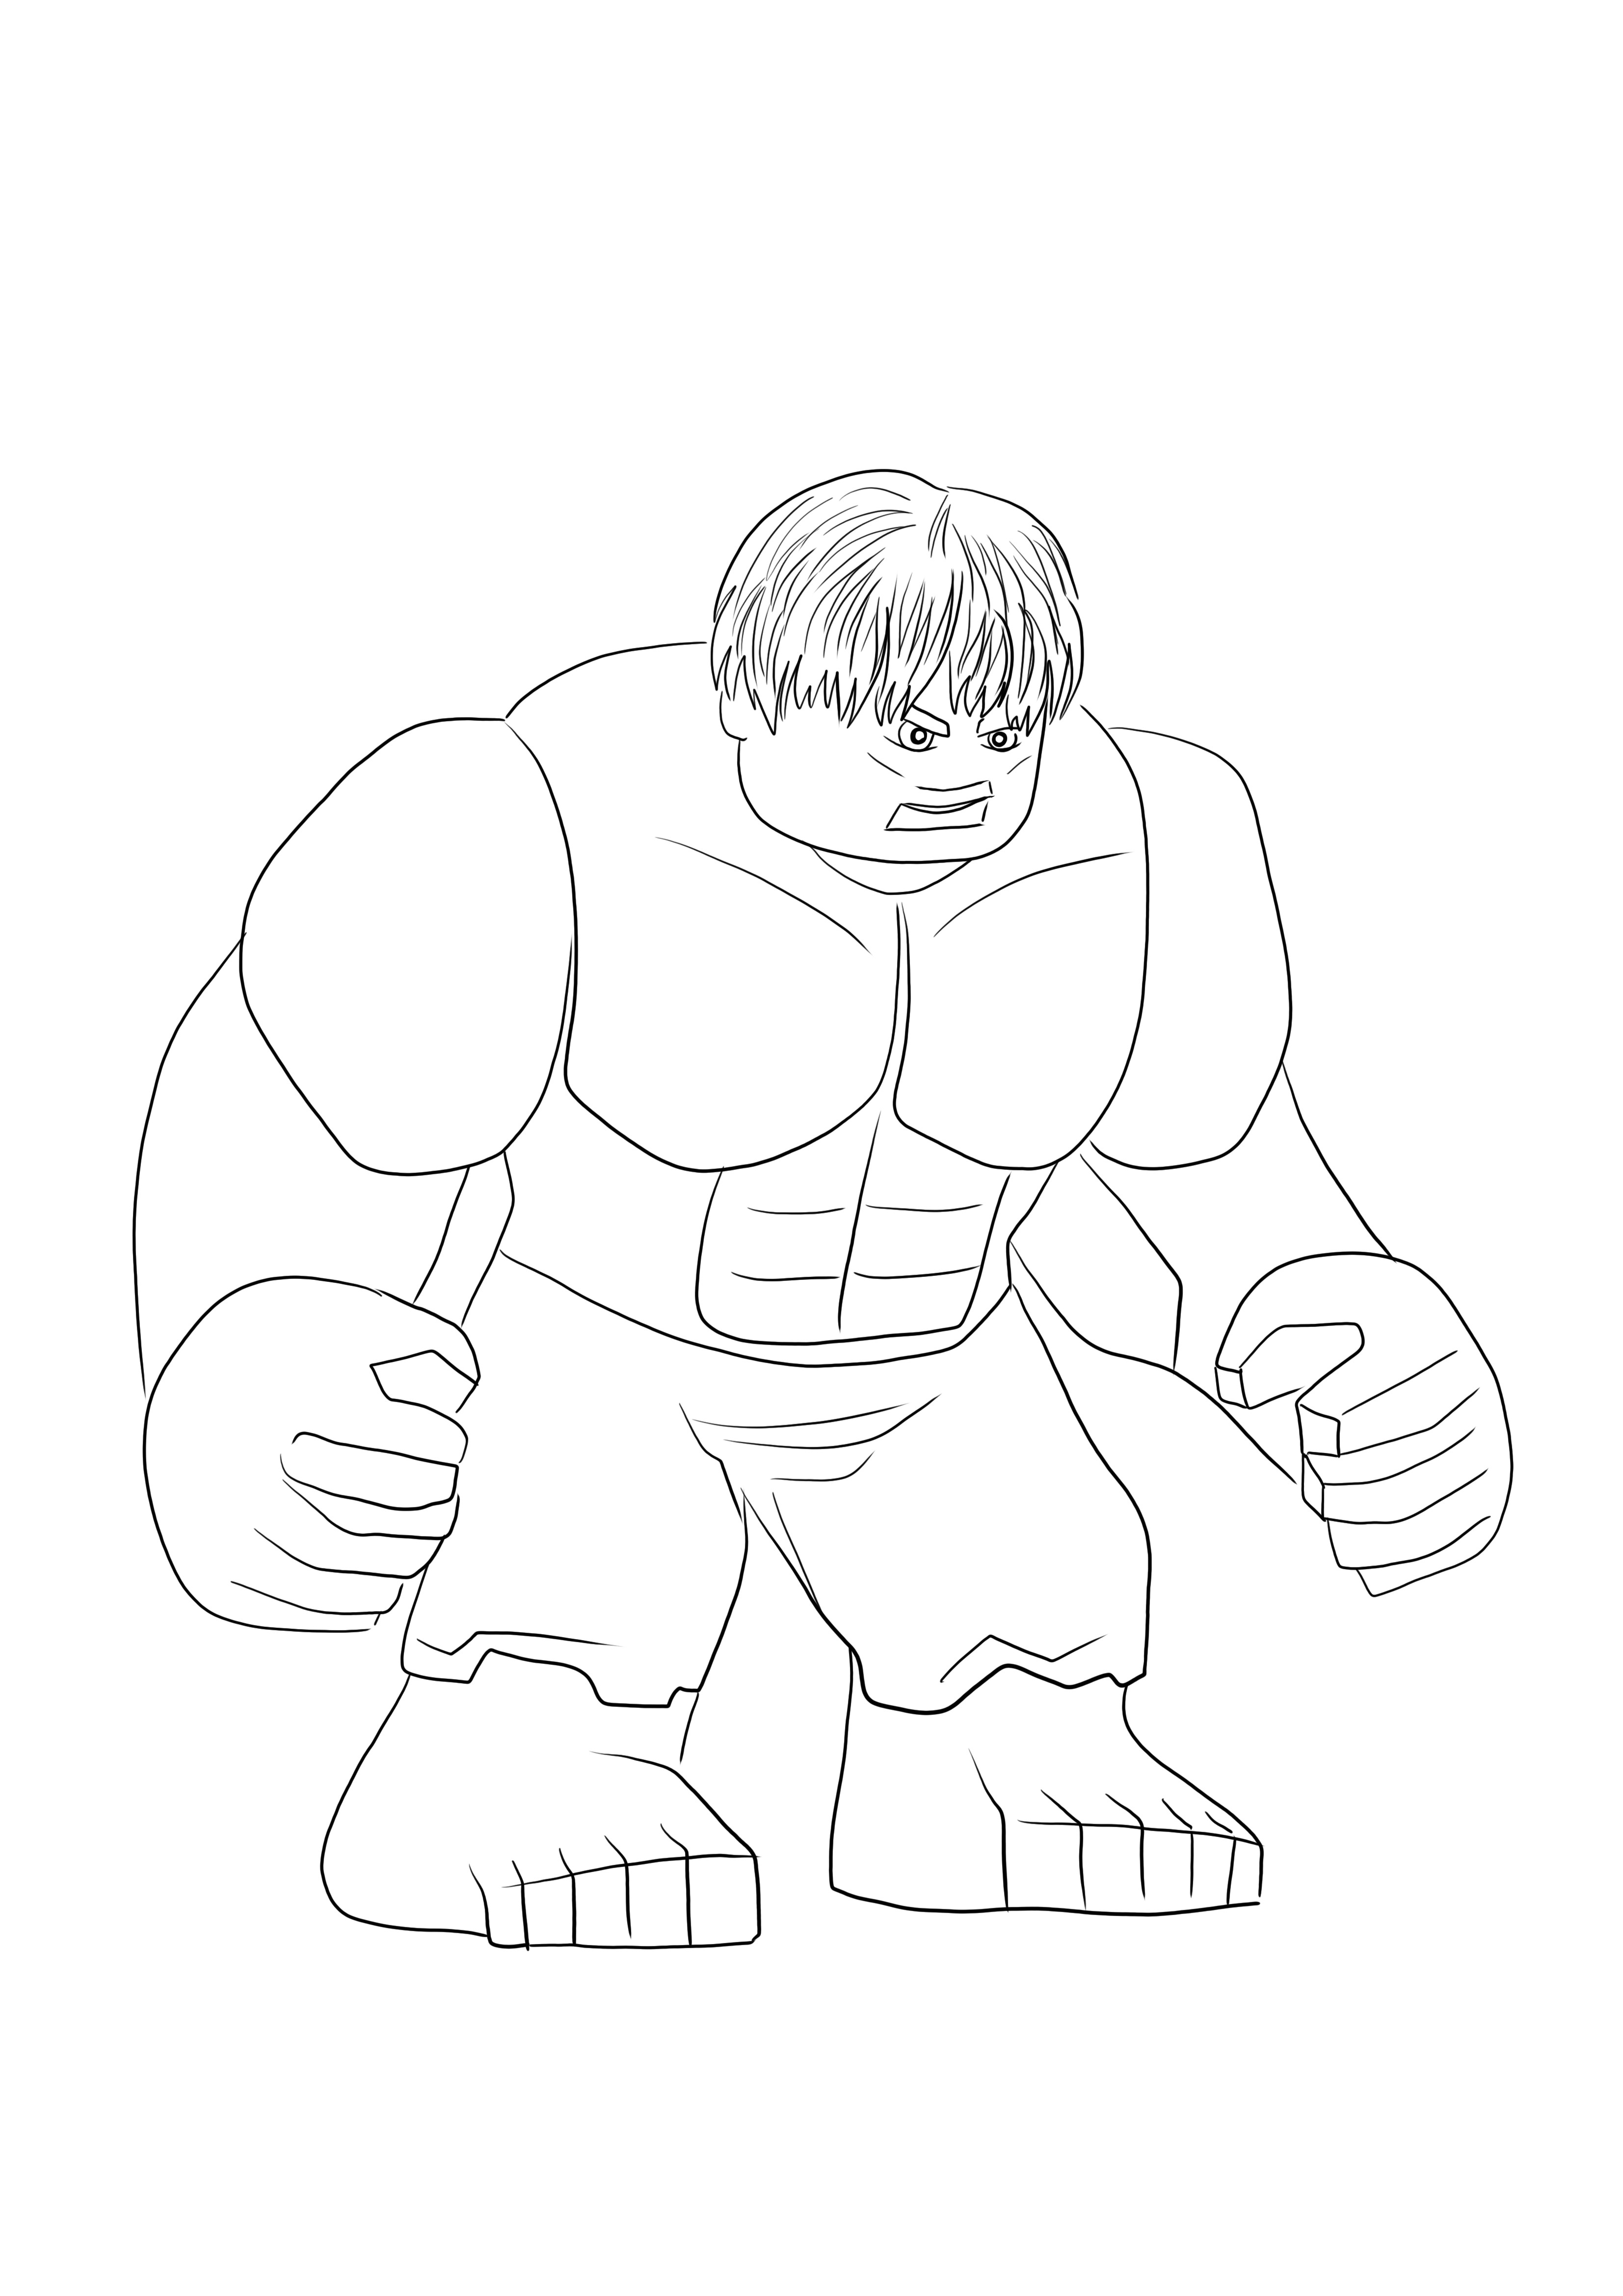 The free Lego Hulk toy is ready to be colored and printed sheet